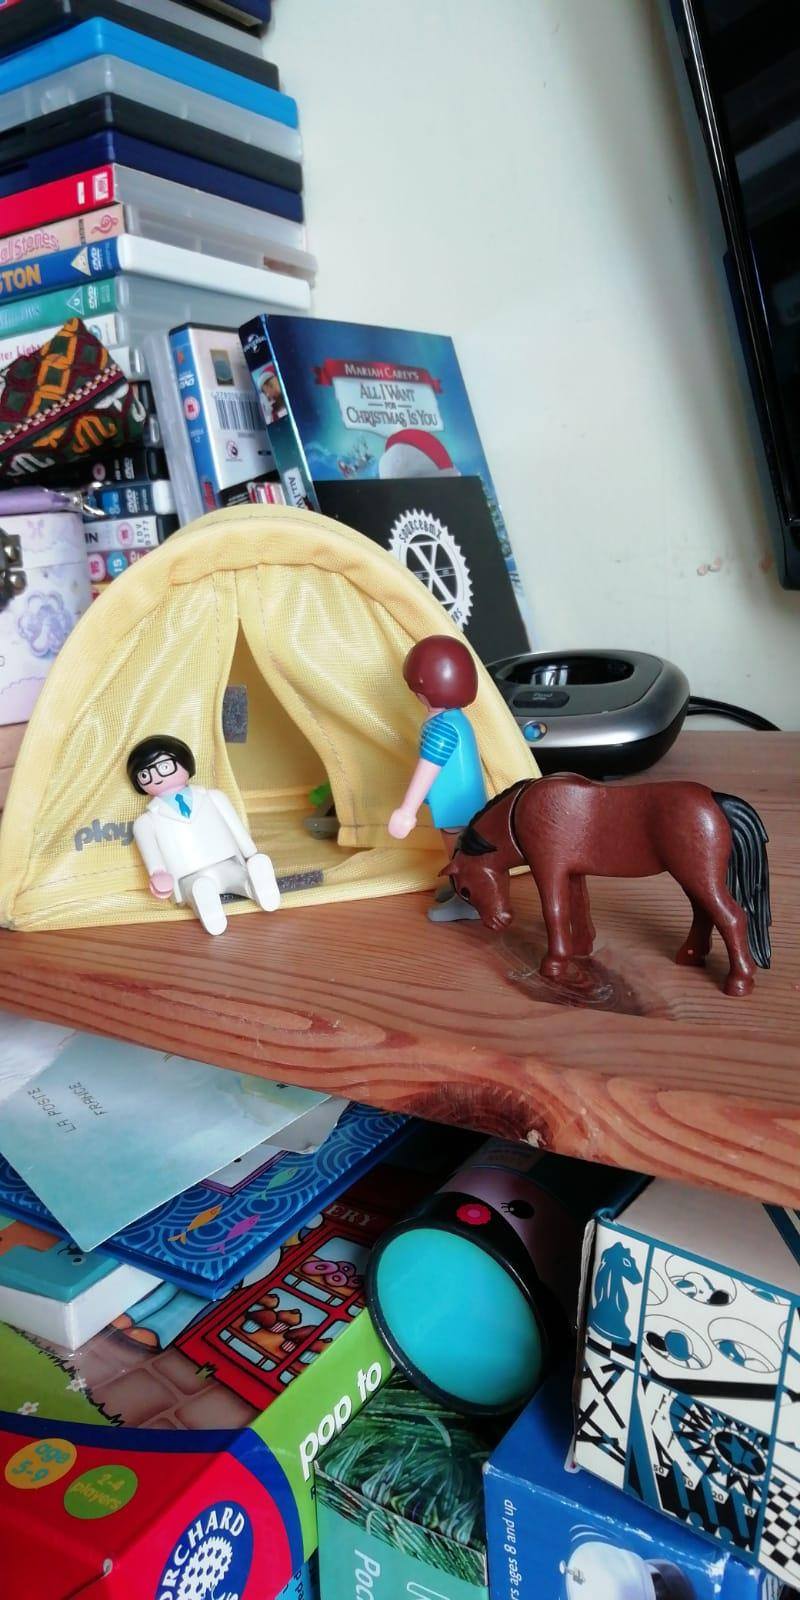 Playmobil toys by tent